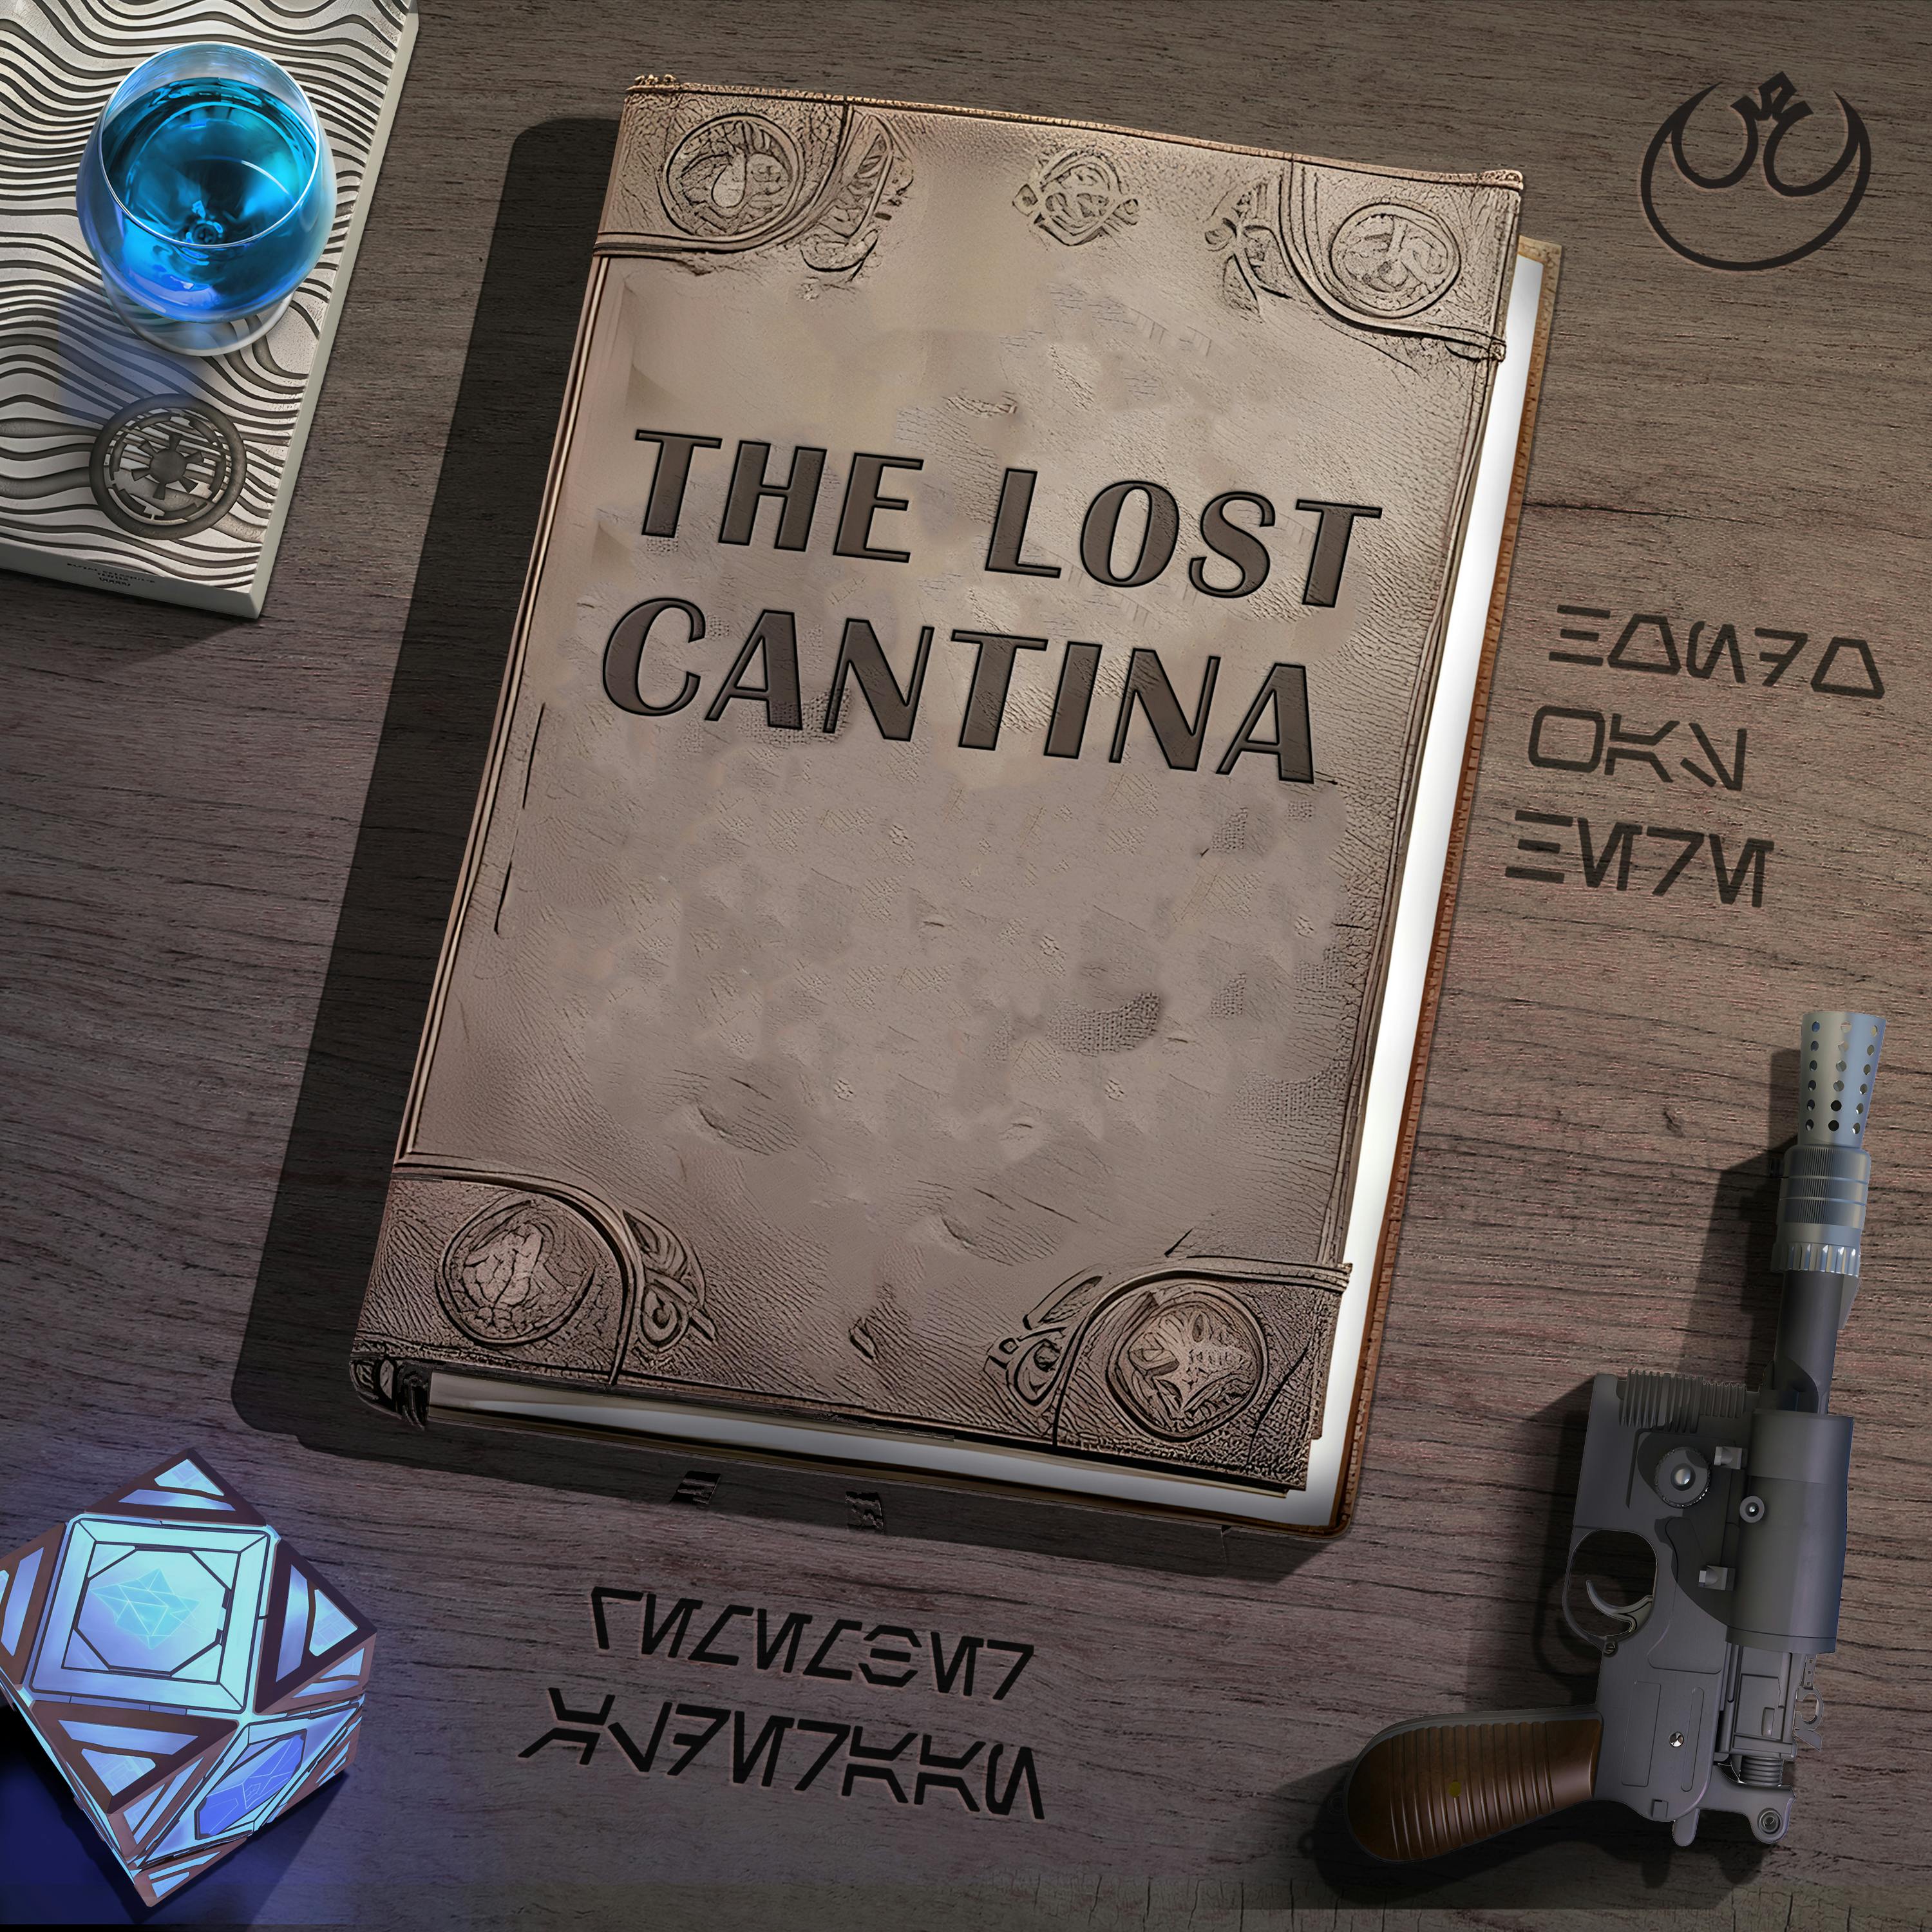 Introducing The Lost Cantina